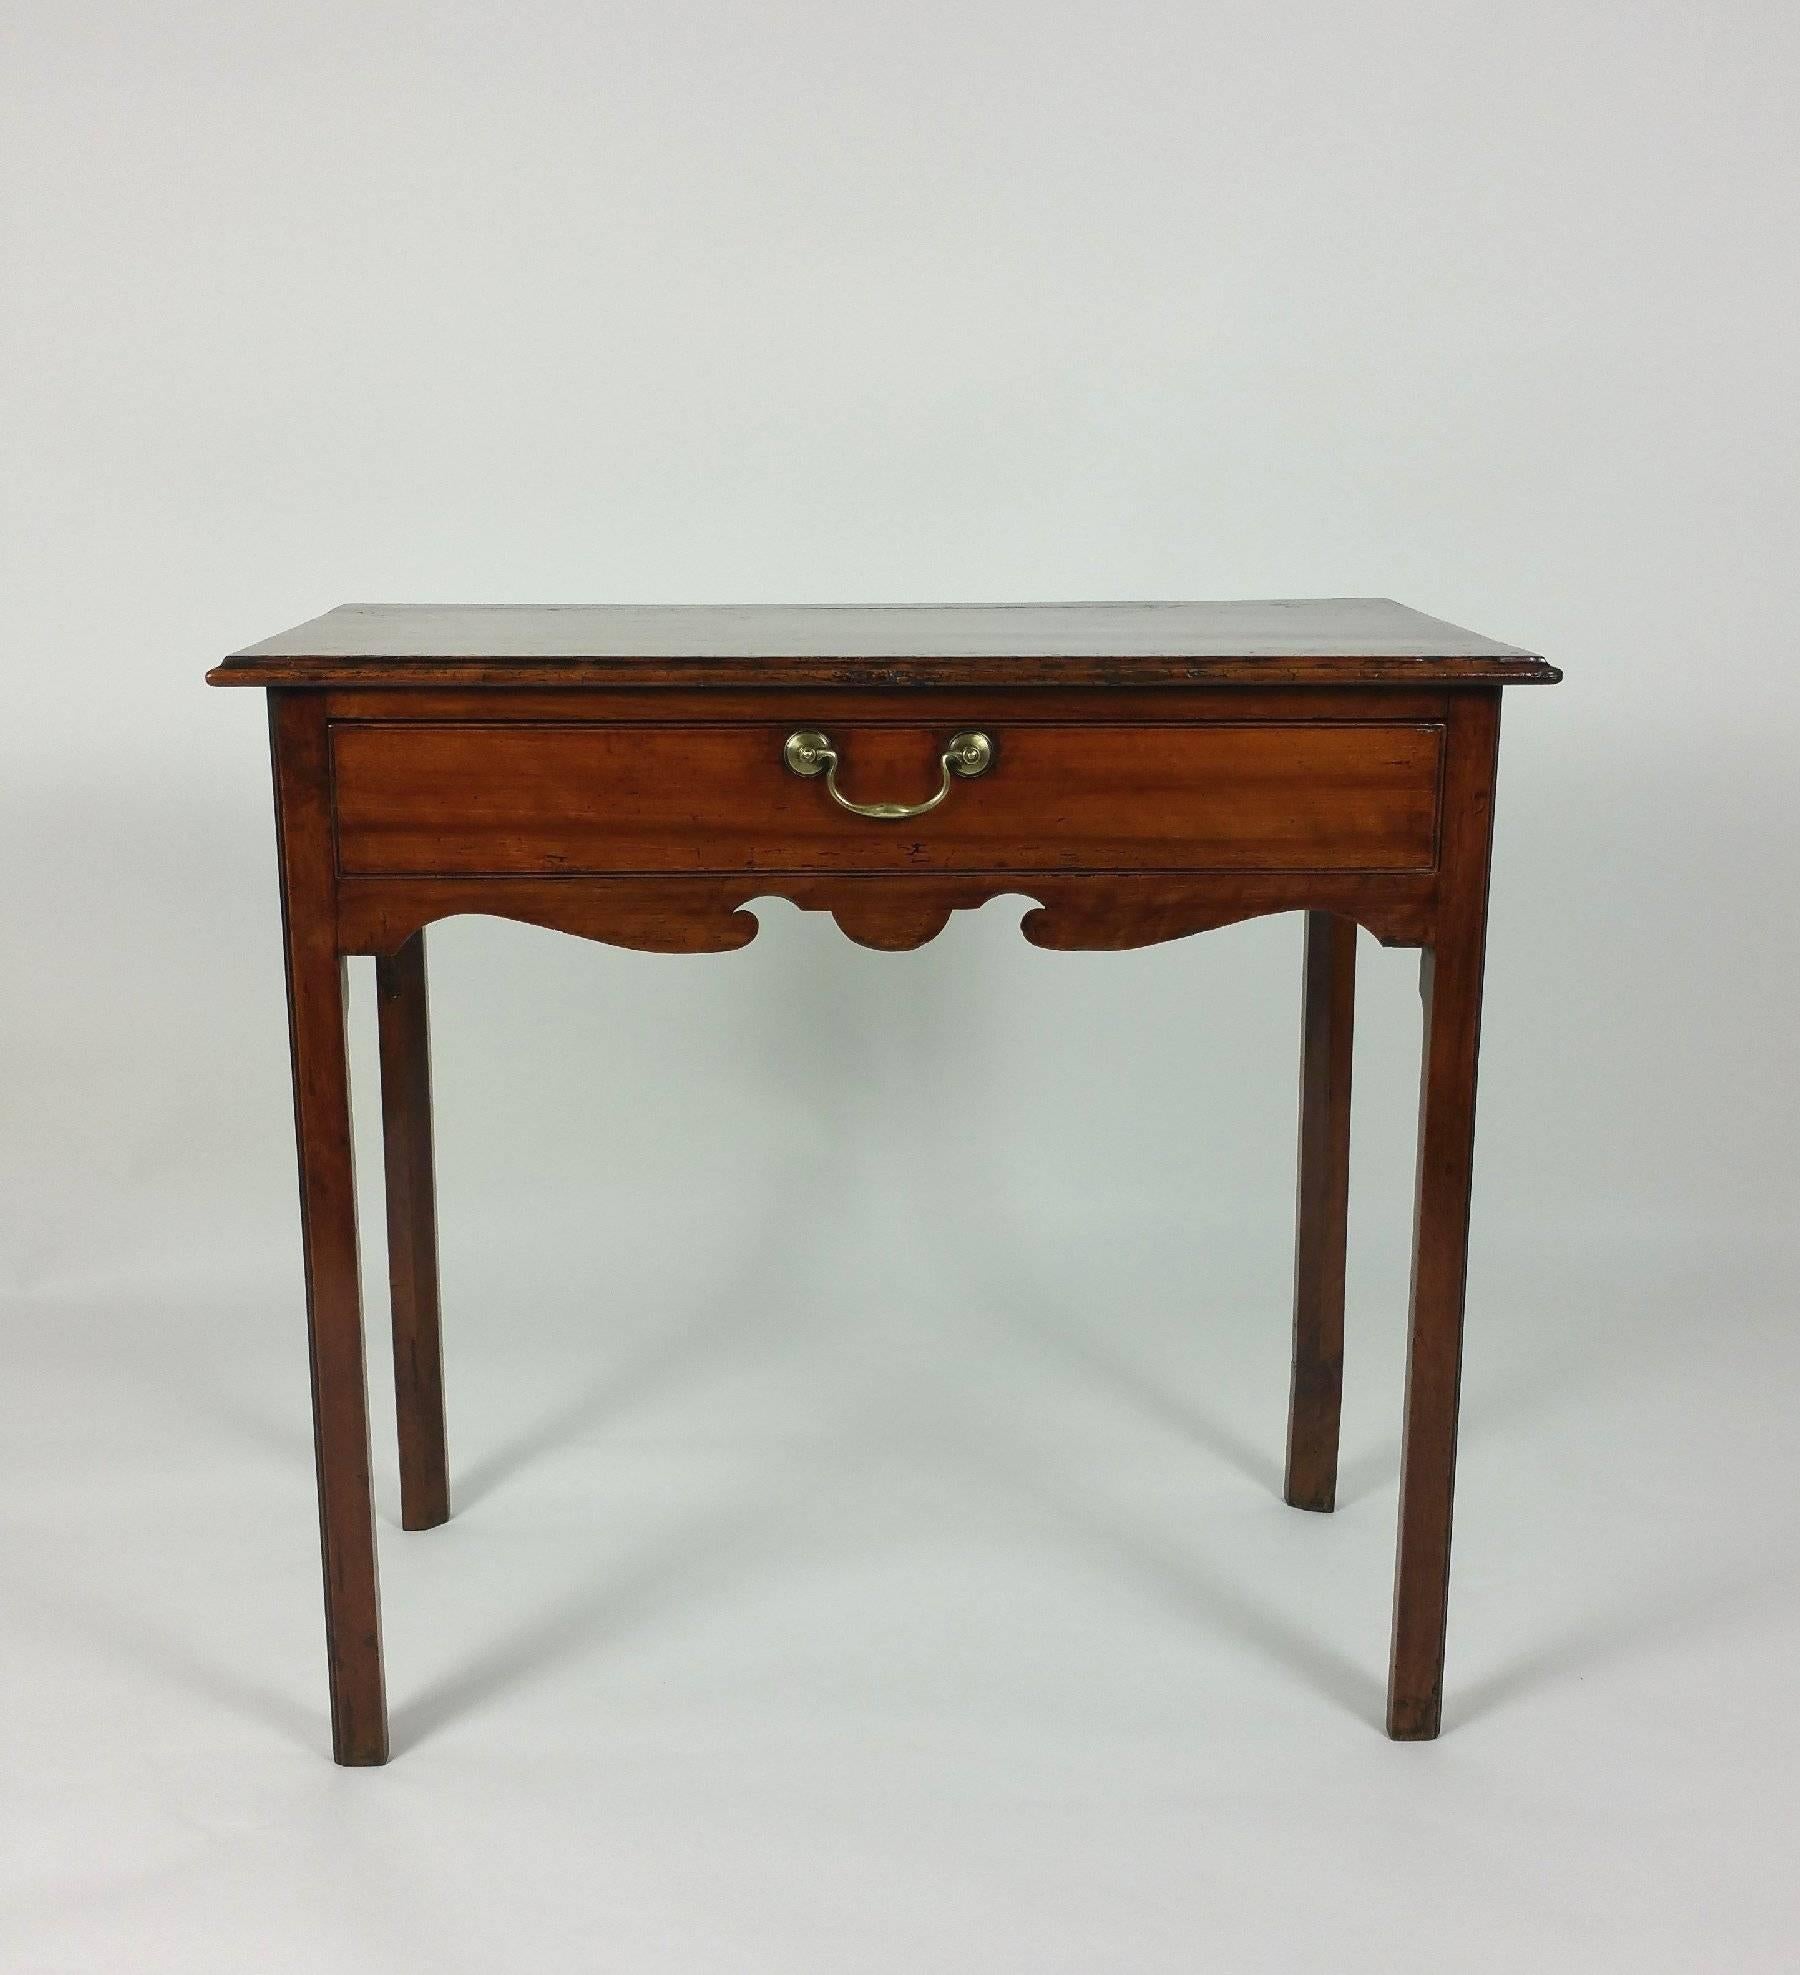 This charming 18th century fruitwood single drawer lowboy features the original brass handle and stands on chamfered square supports. It measures 33 1/4 wide, 18 3/4 in deep and 30 in height.